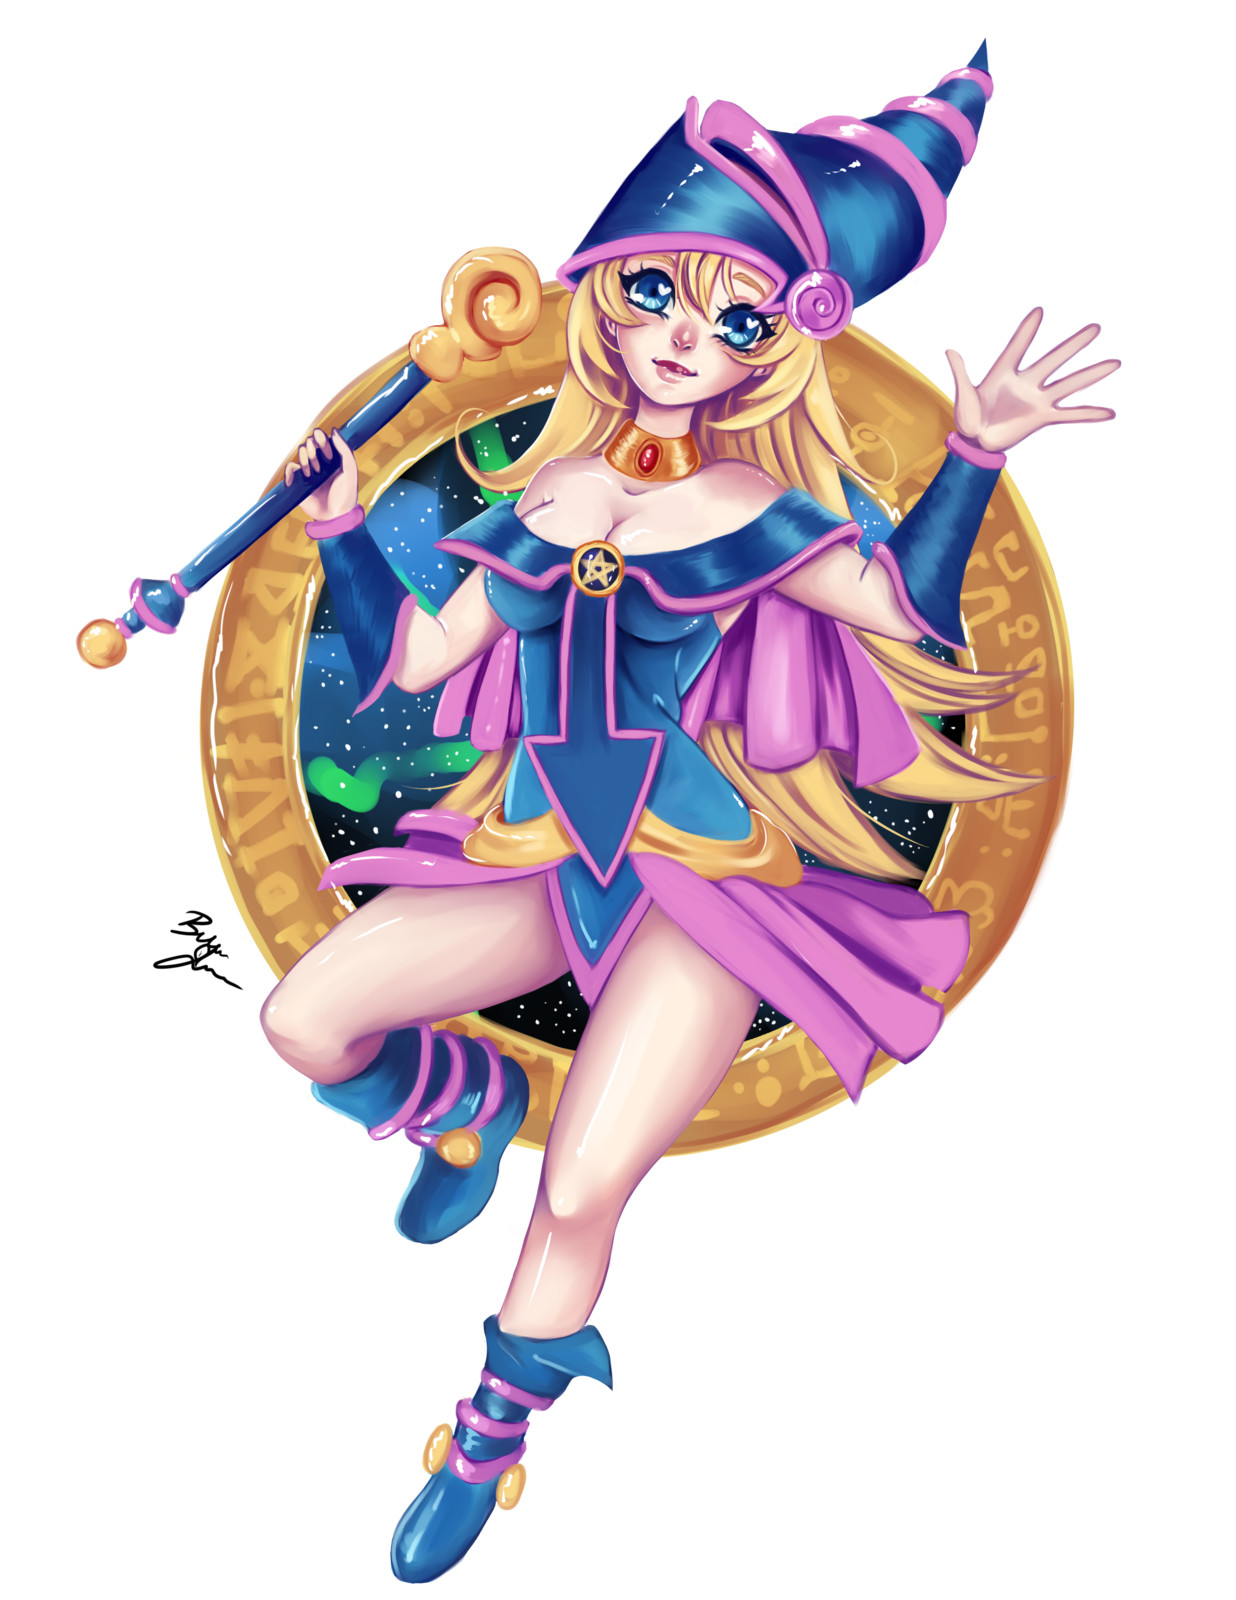 Dark Magician Girl 
Completion